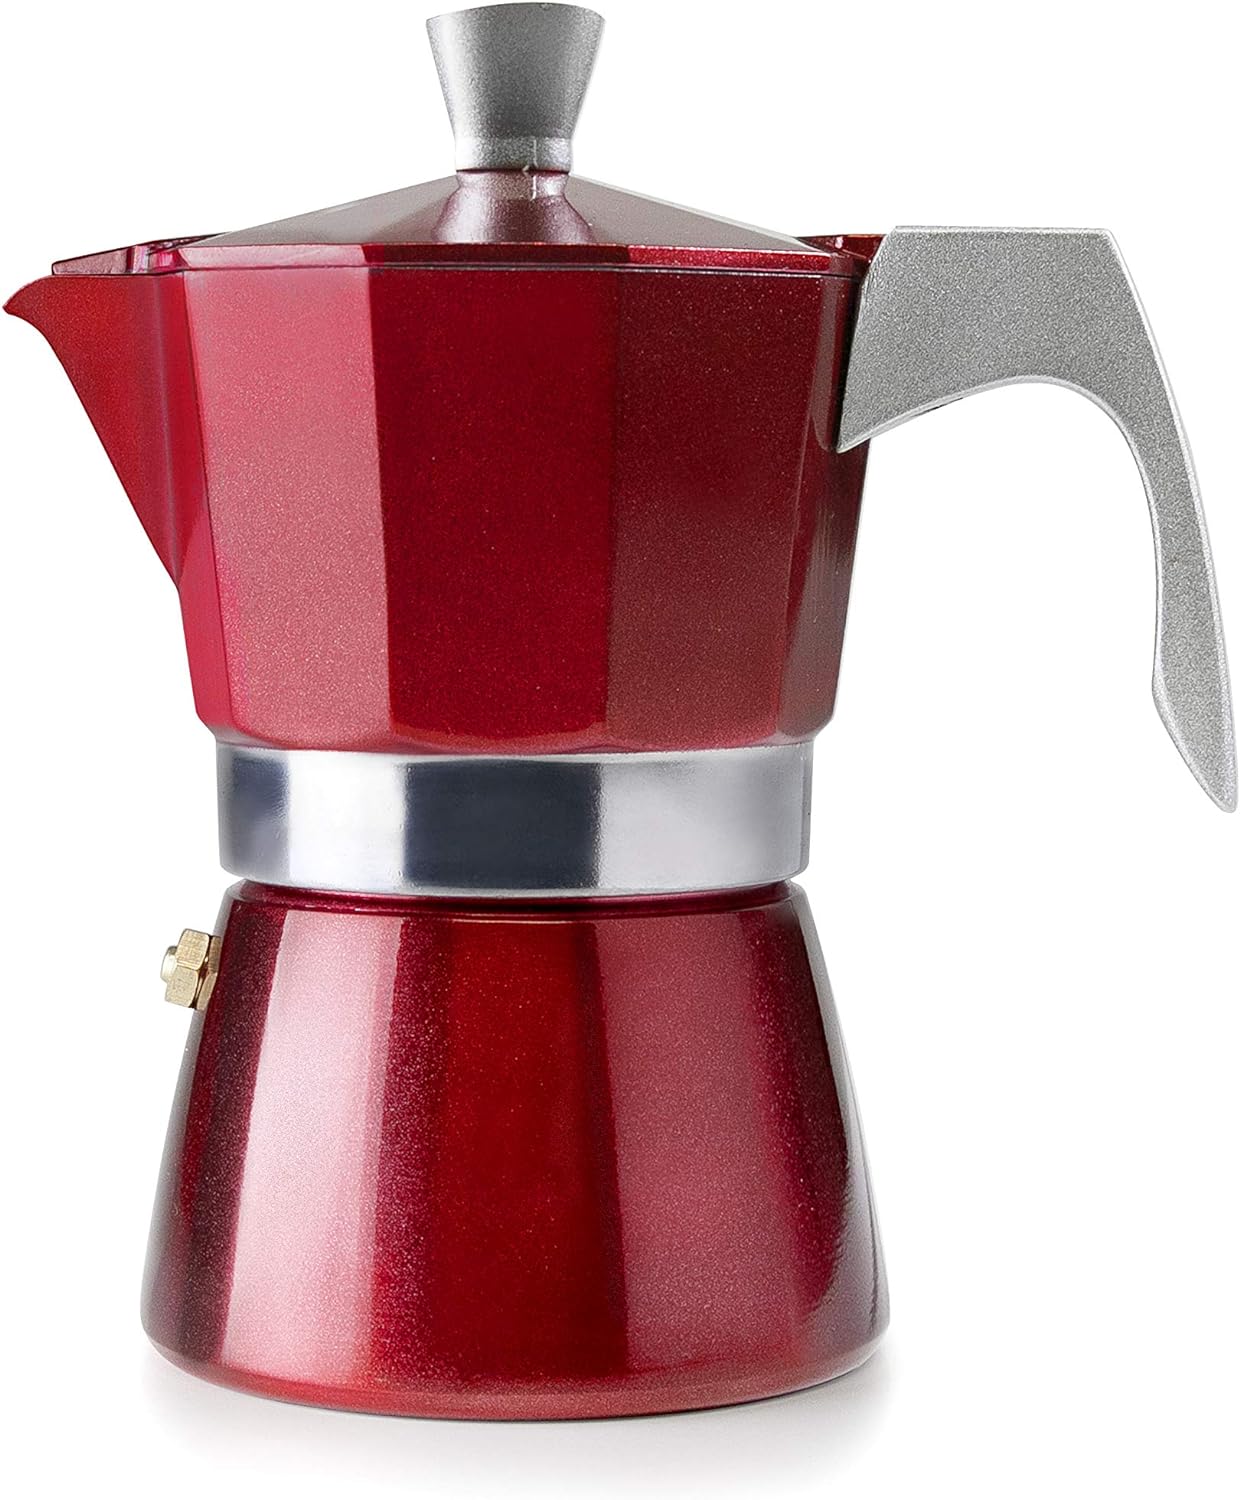 Ibili - Express coffee cooker EVVA RED, 12 cups, 600 ml, die -cast aluminum, suitable for induction herds